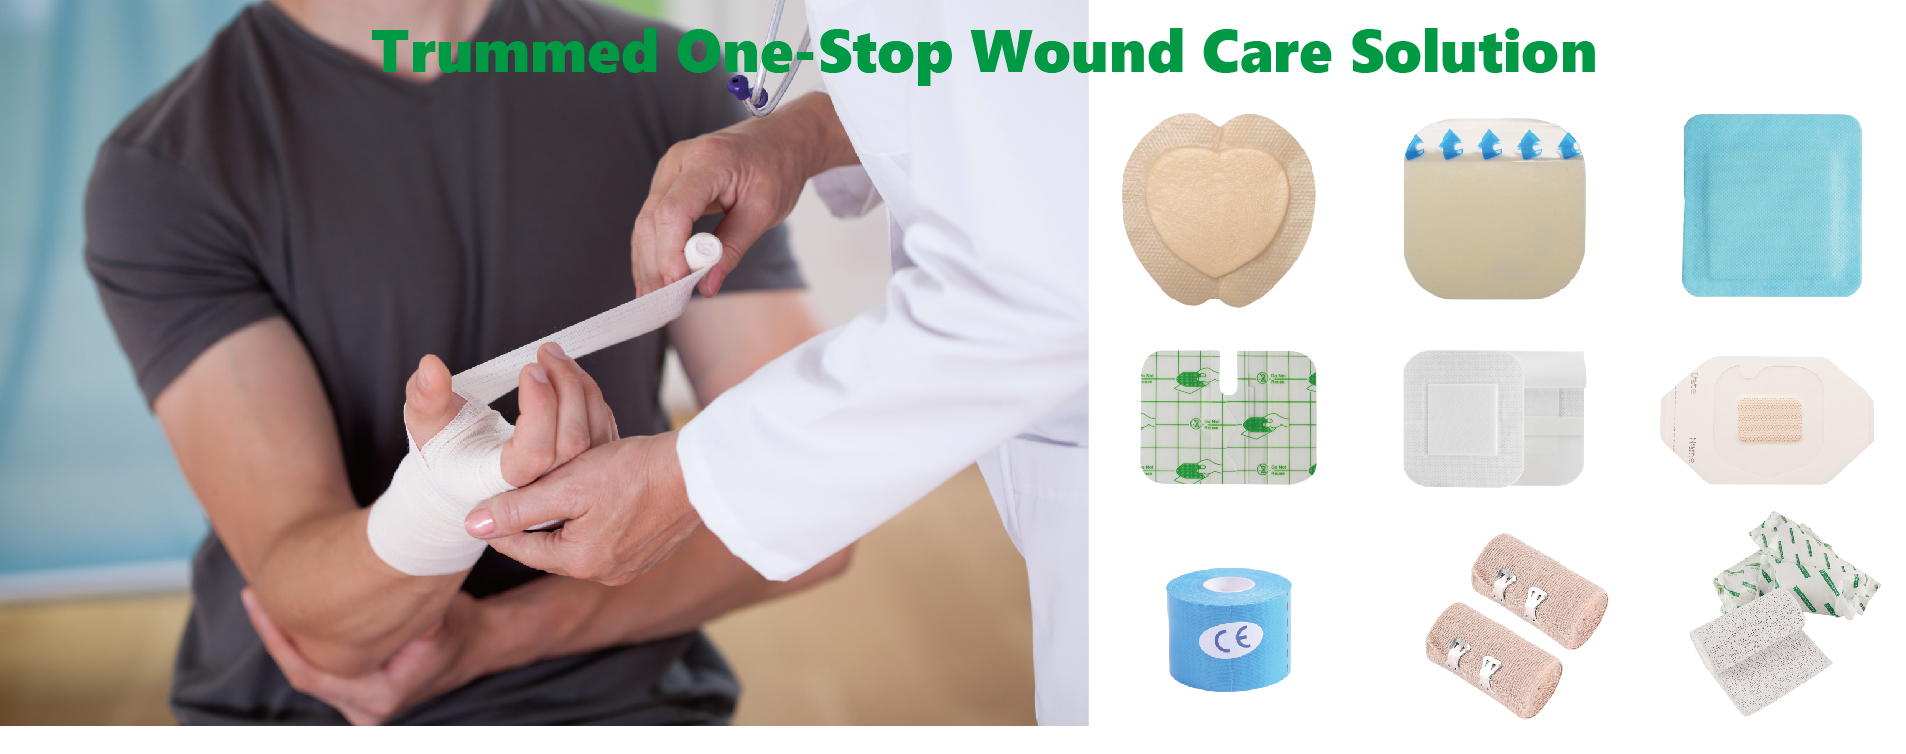 How Often Should You Change a Wound Dressing